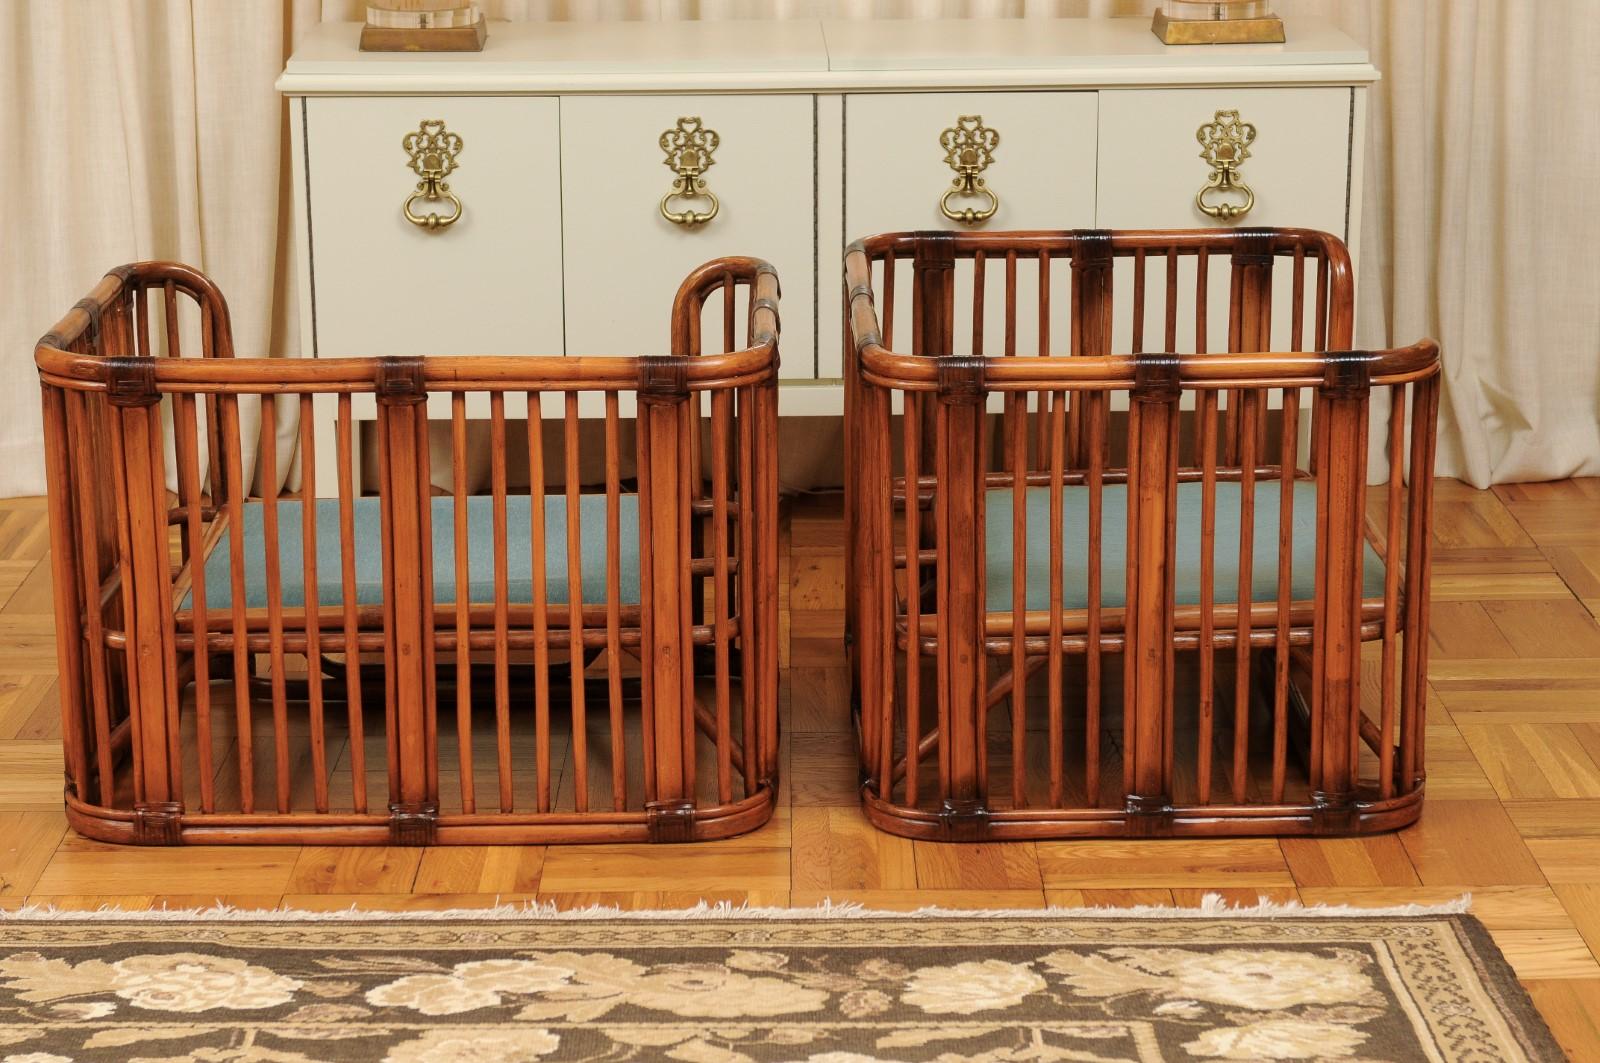 Incredible Pair of Large Scale Rattan Cube Loungers by Brown Jordan, circa 1980 For Sale 2